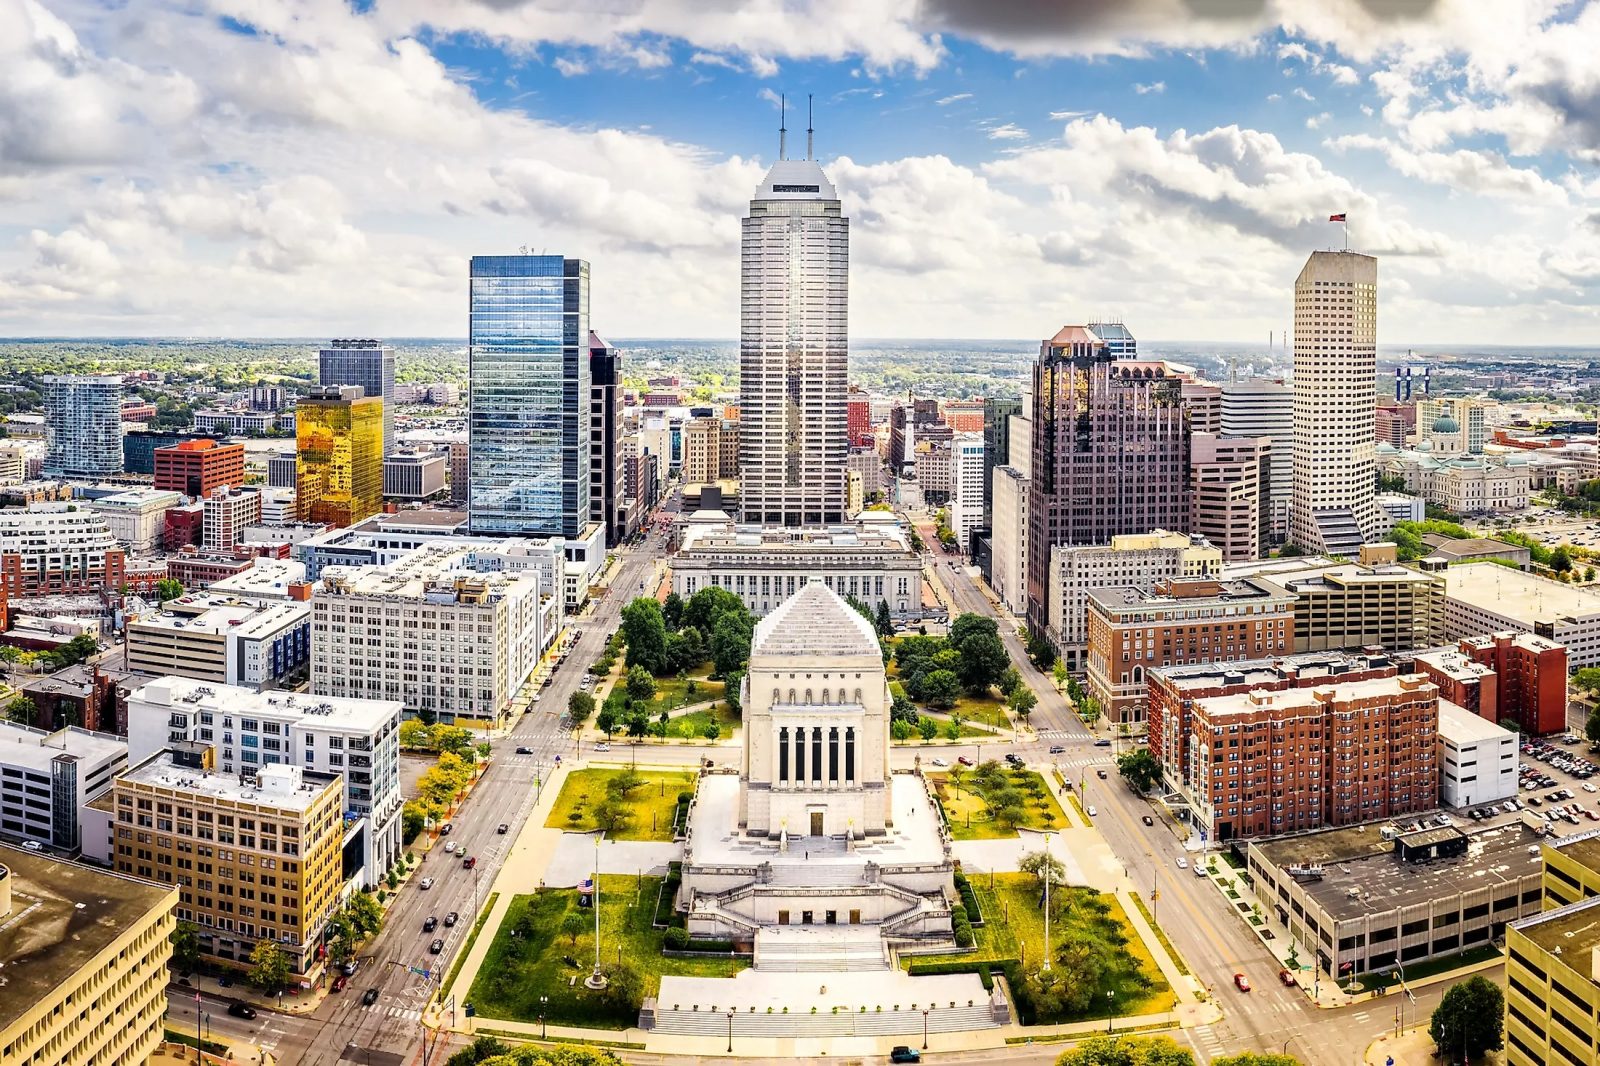 Create Your Dream 🚗 USA Road Trip to Find Out What Season Your Soul Aligns With Indianapolis, Indiana